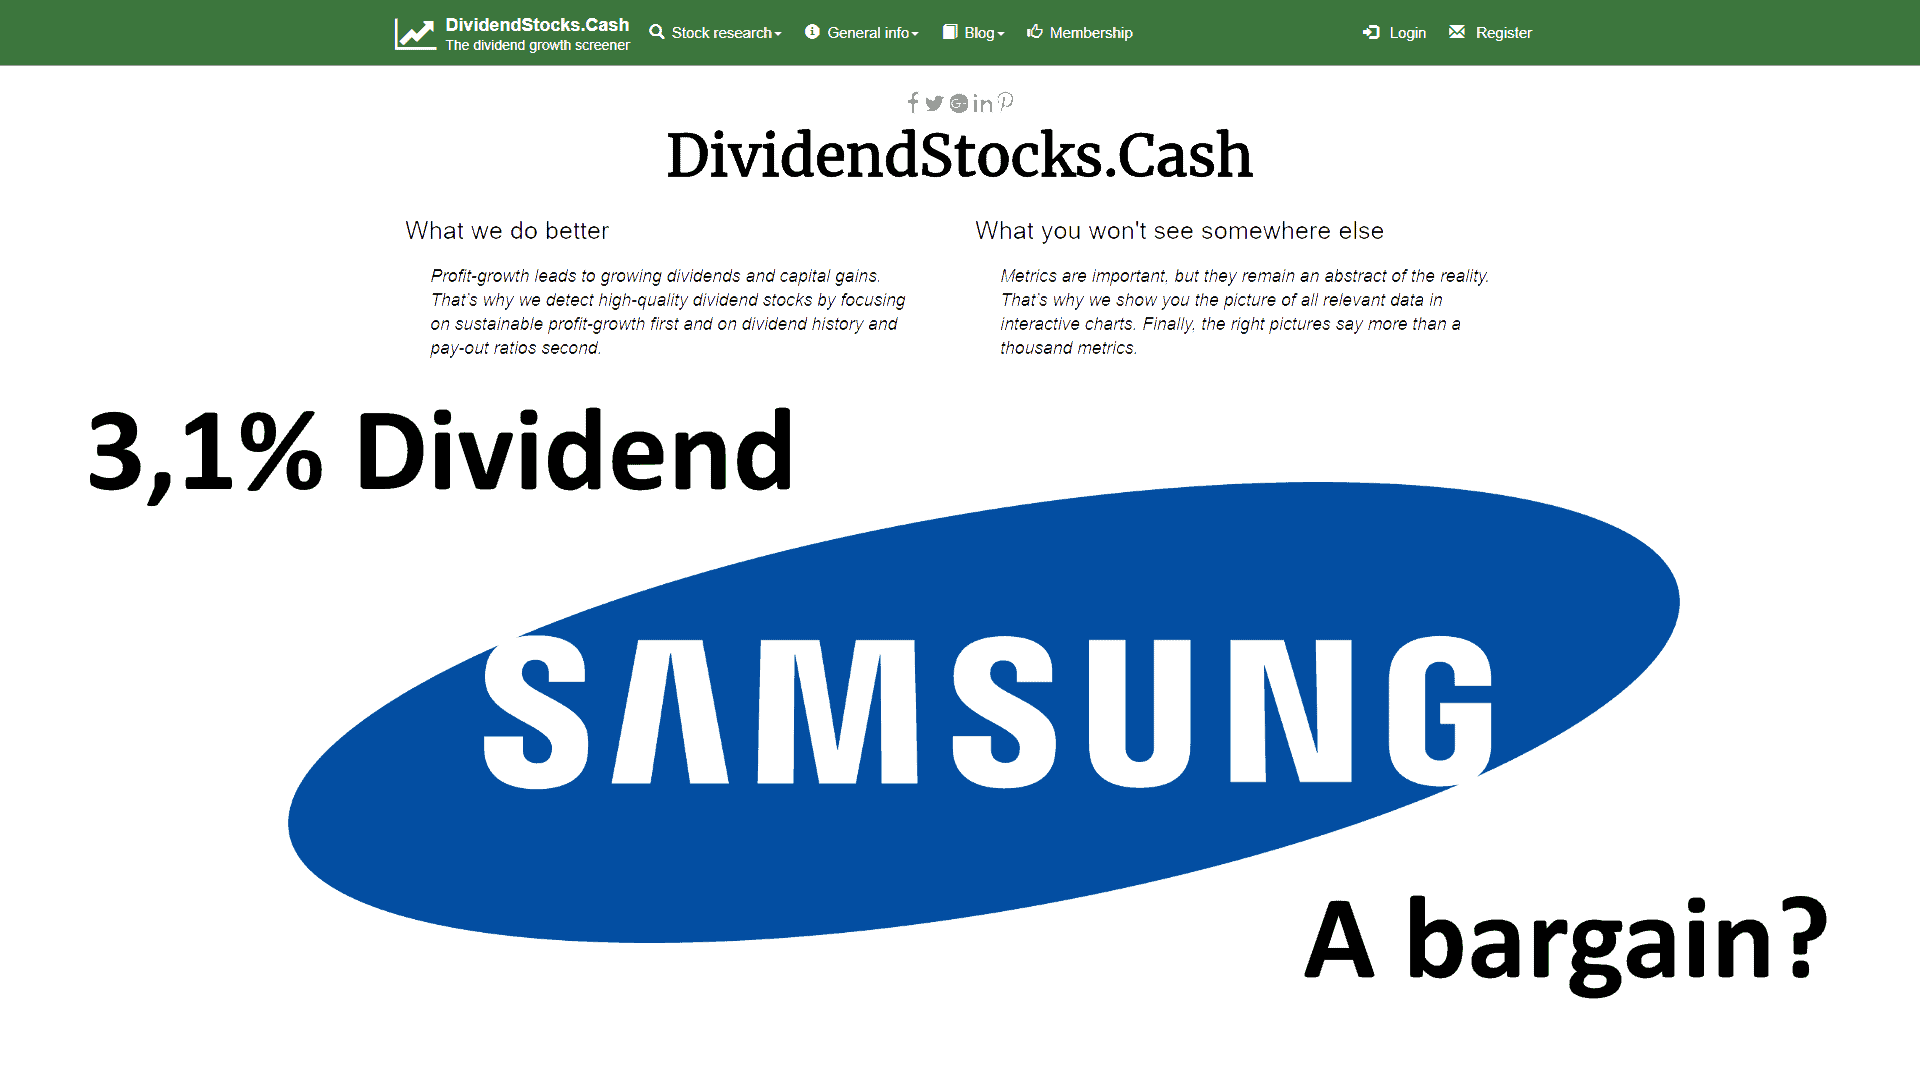 Samsung: Tech giant with 3.1% dividend yield as a bargain?